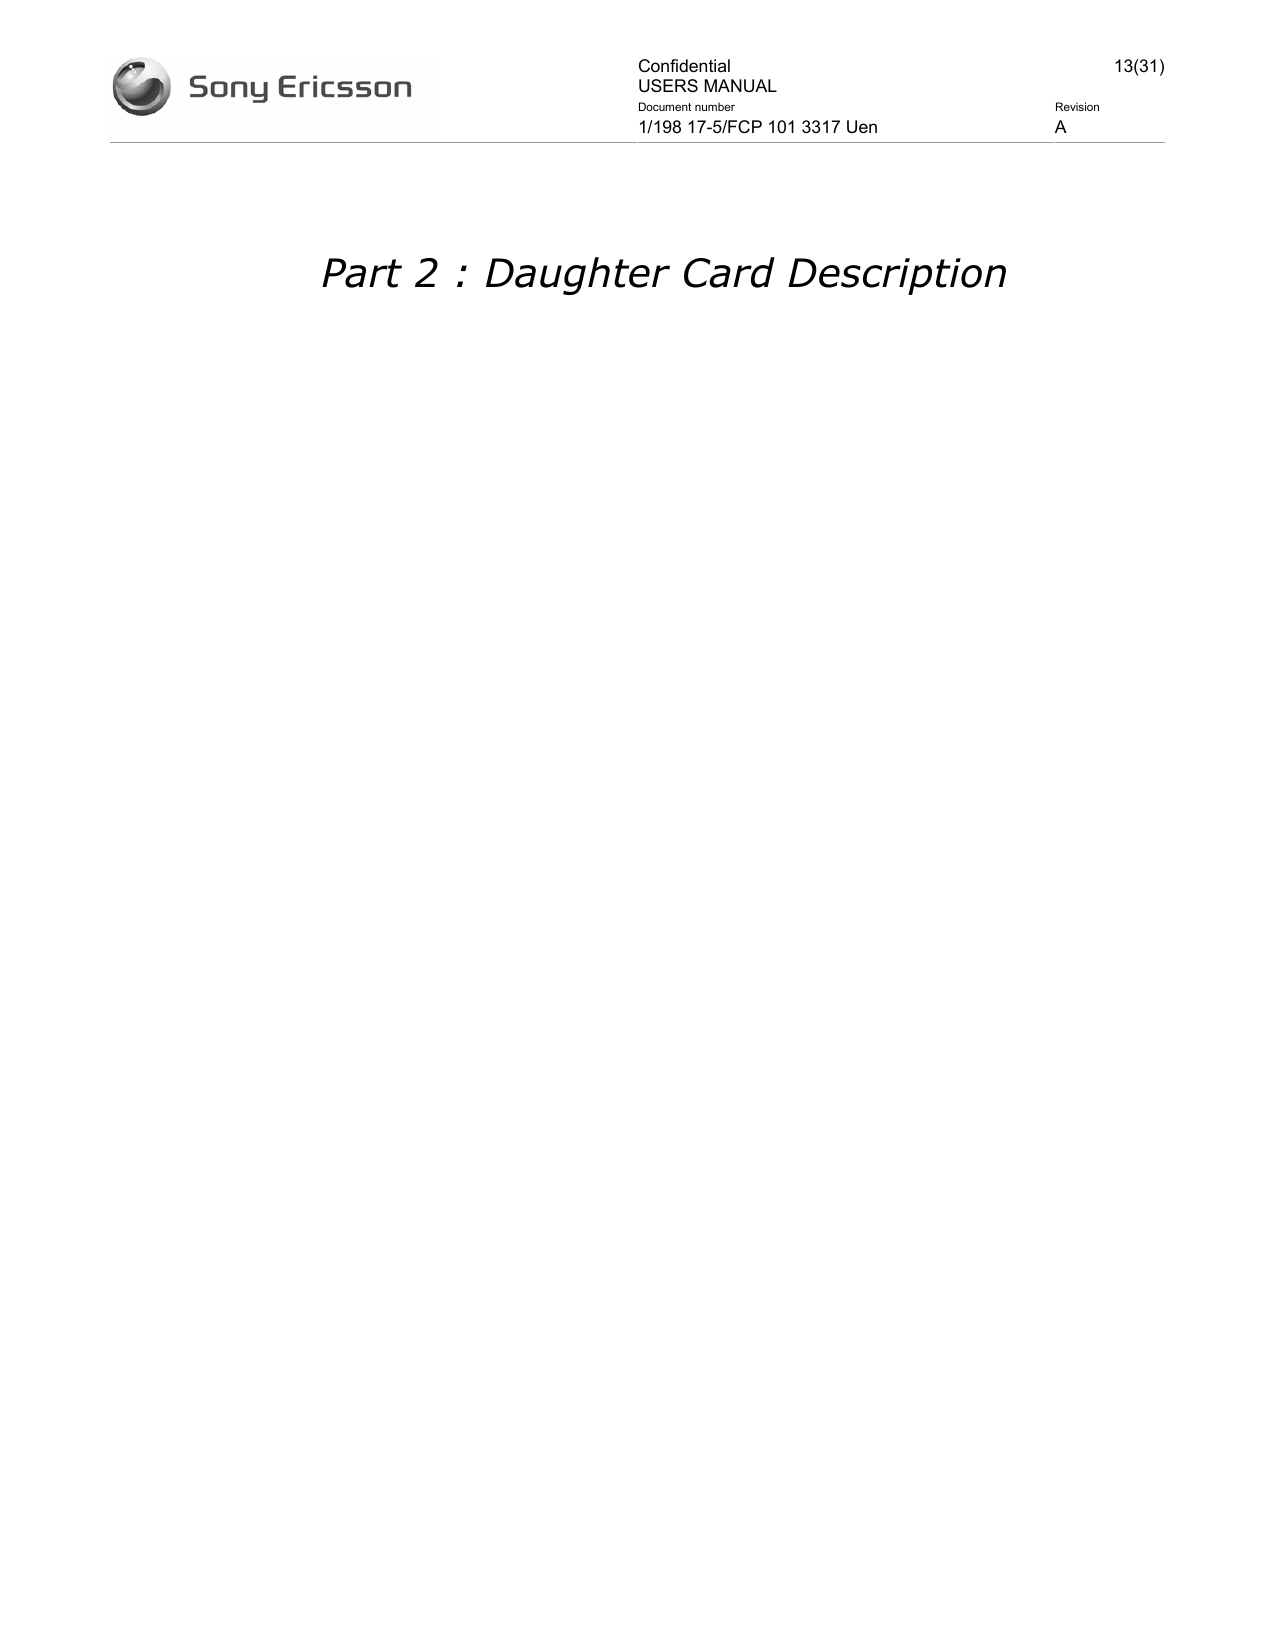 Confidential USERS MANUAL 13(31)Document number  Revision 1/198 17-5/FCP 101 3317 Uen  A     Part 2 : Daughter Card Description 